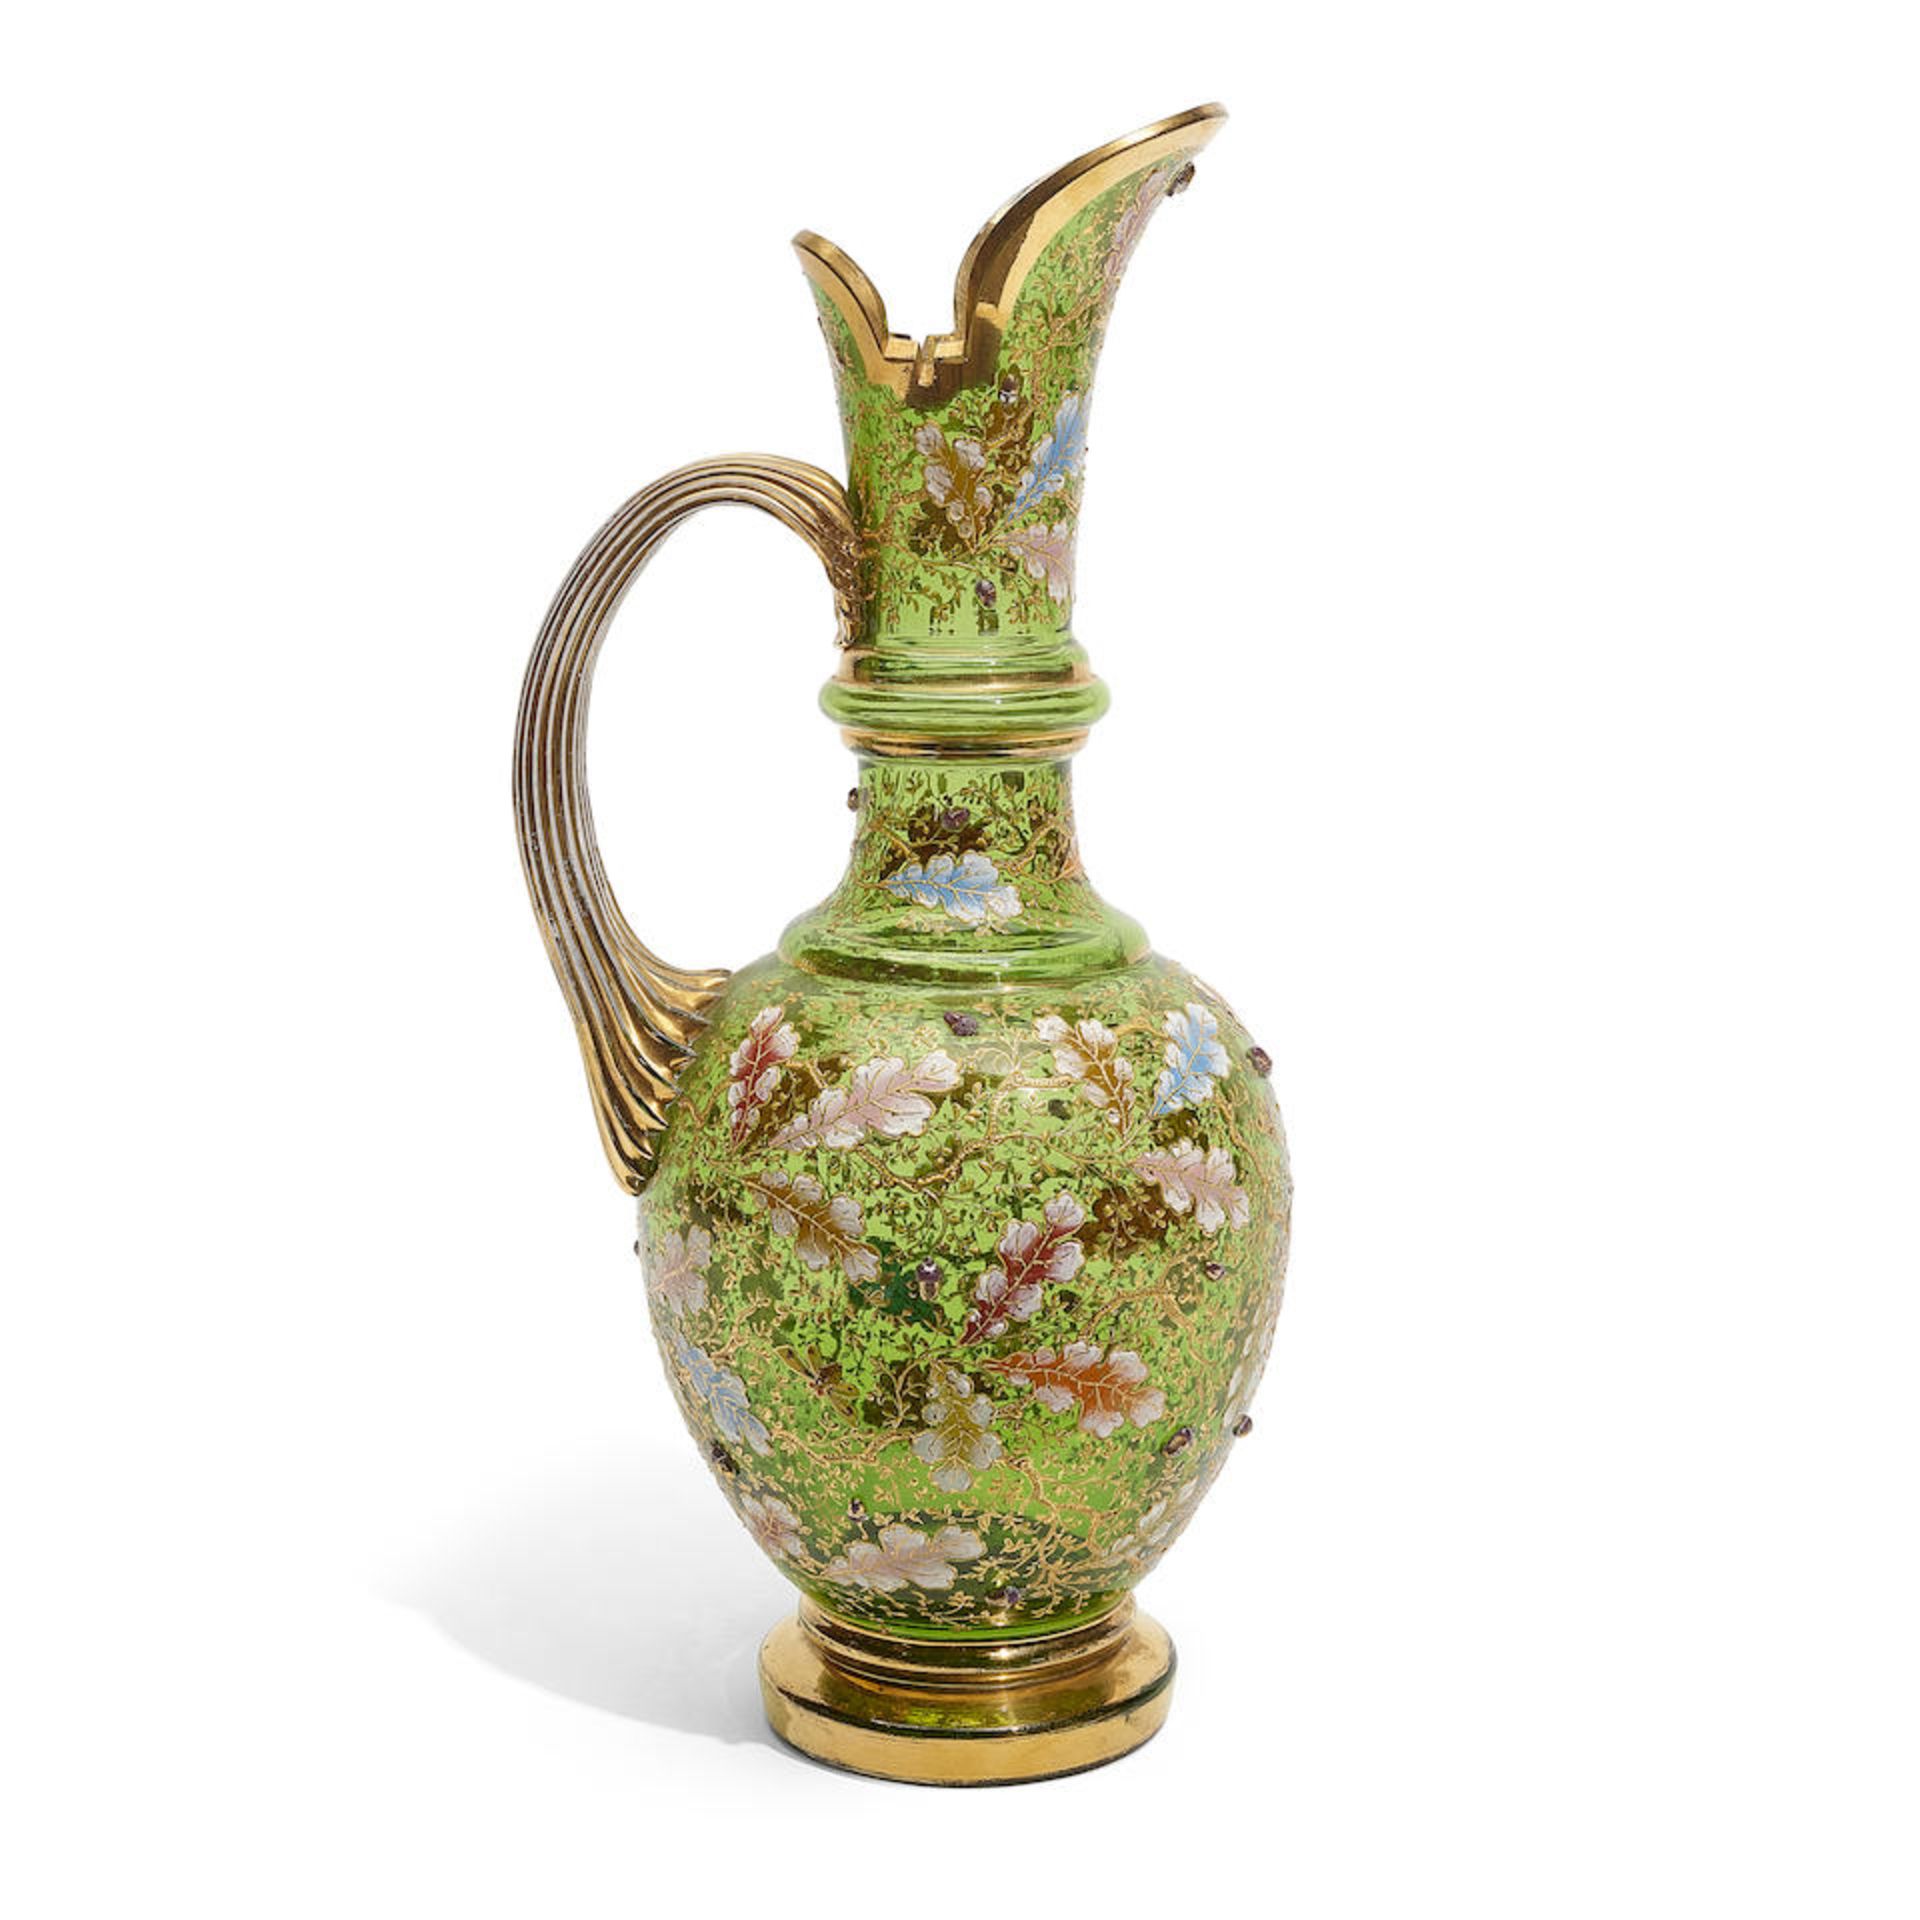 A MOSER GILT AND ENAMELLED GREEN GLASS EWEREarly 20th century